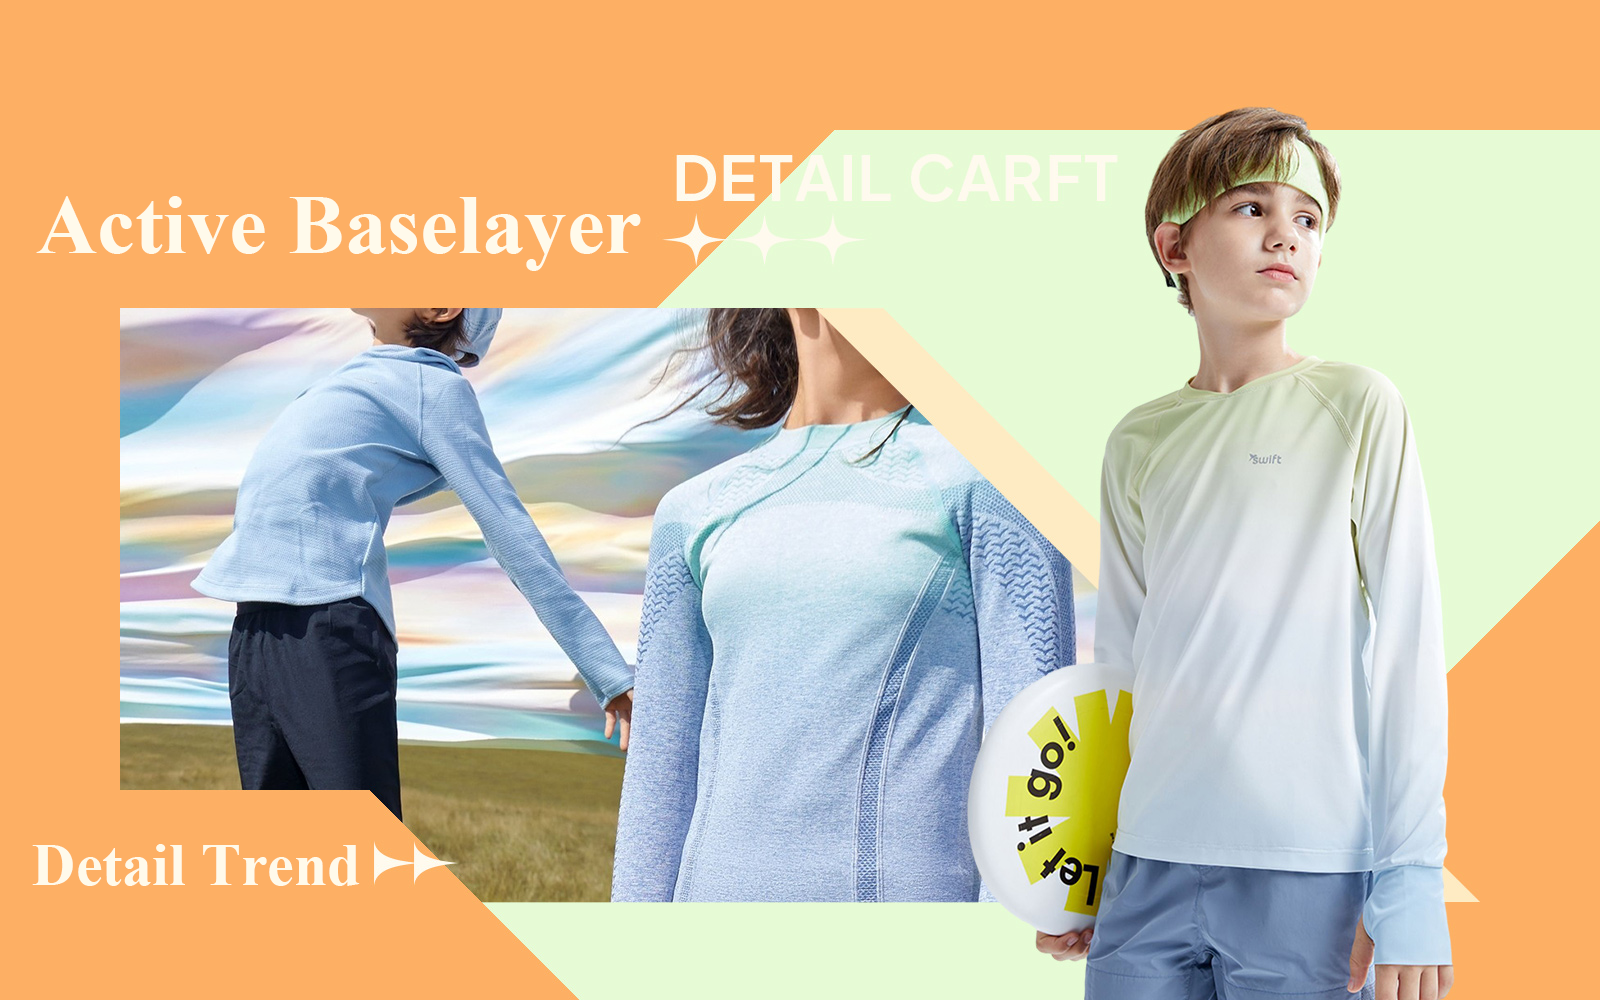 Active Baselayer -- The Detail & Craft Trend for Kidswear